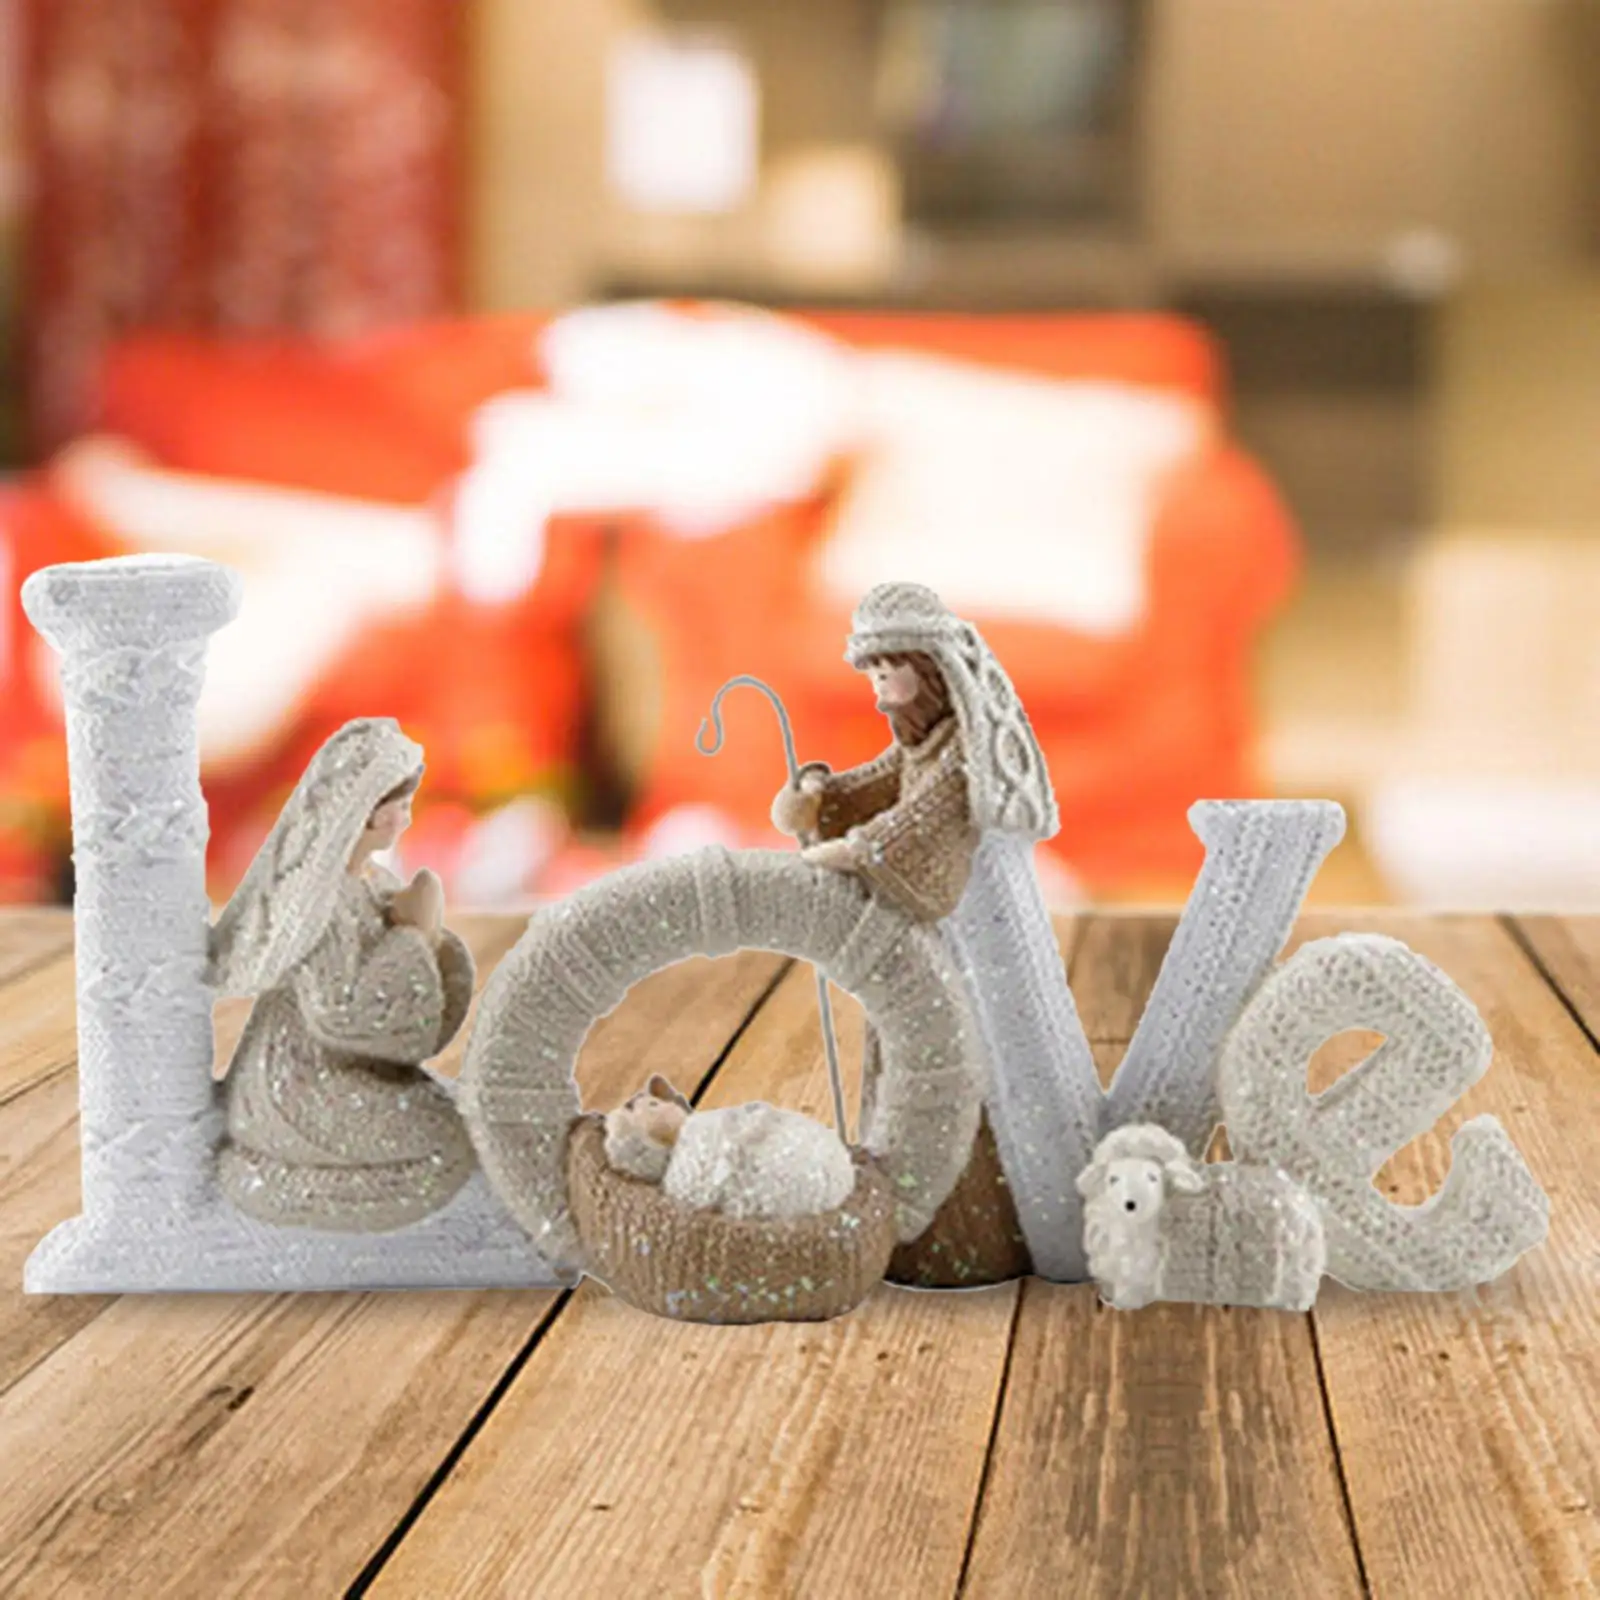 Alphabet Ornaments Table Decor Festival Wedding Decoration Table Centerpiece Crafts Holiday Gifts European Collectible Figurine